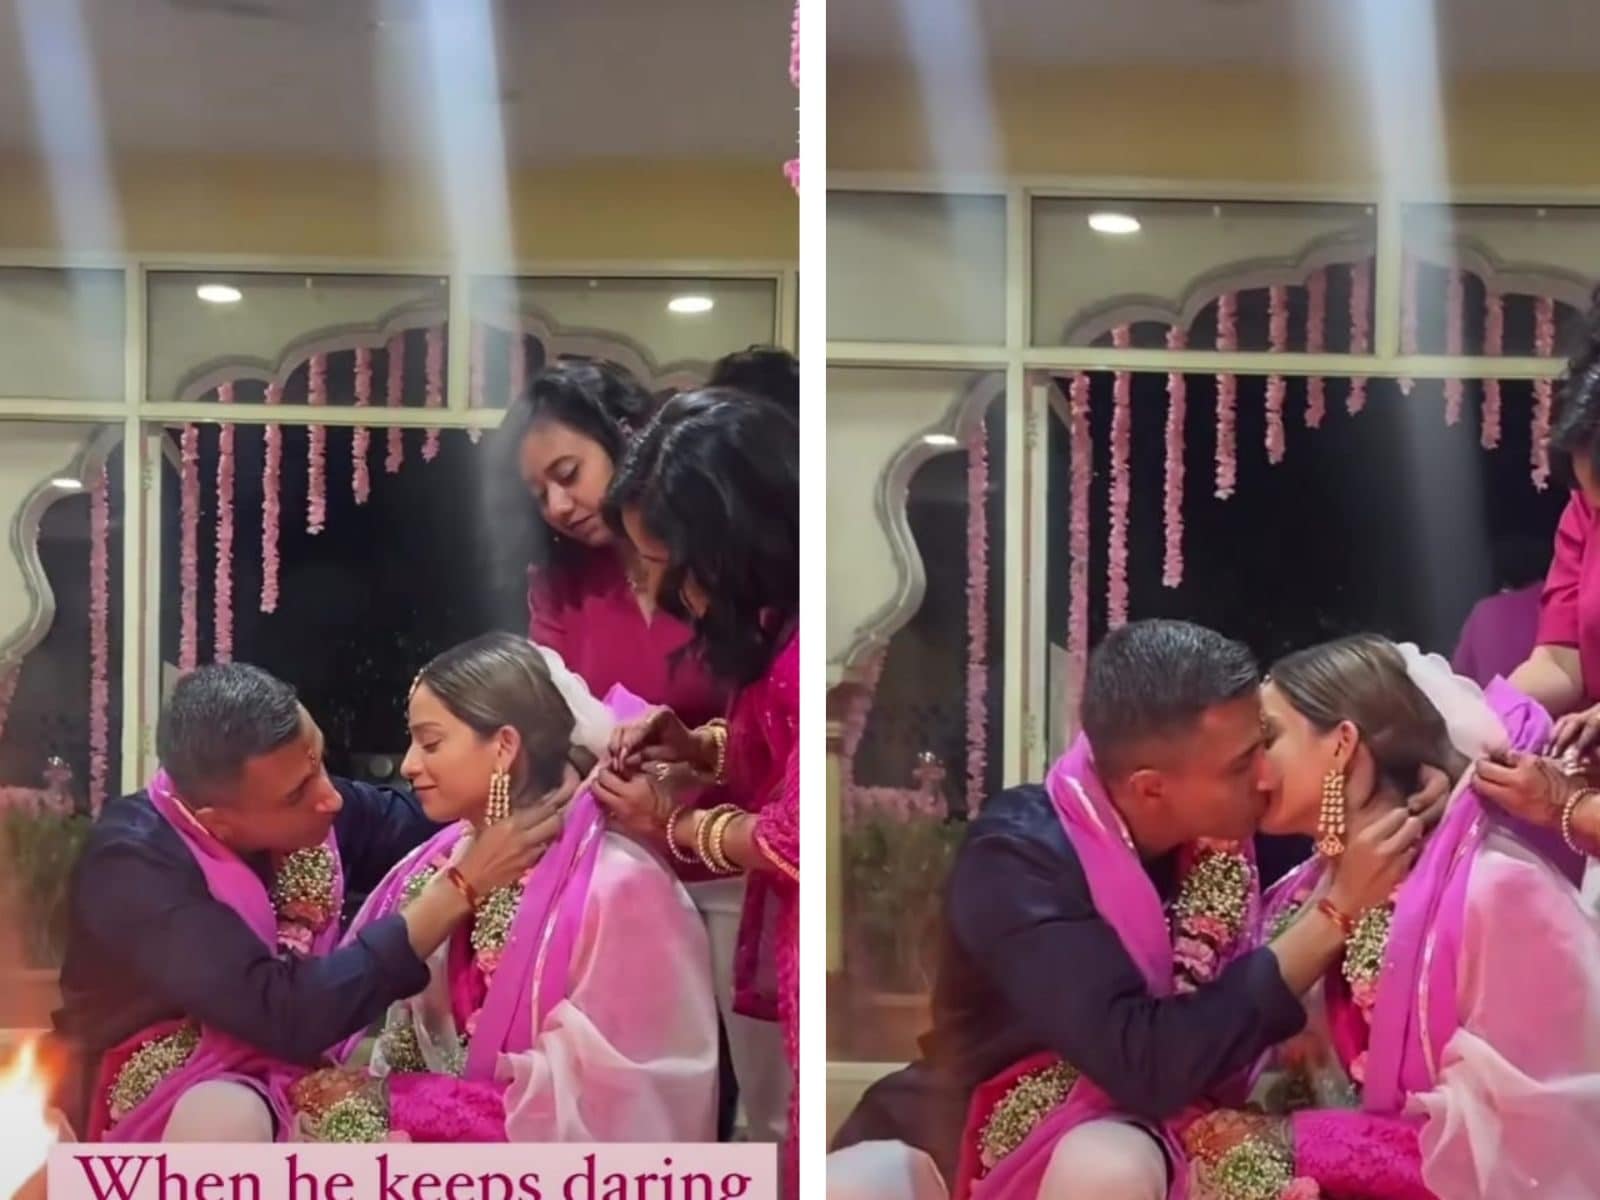 Viral Video of Indian Couple Kissing During Wedding Ceremony in Mandap Garners Mixed Reactions